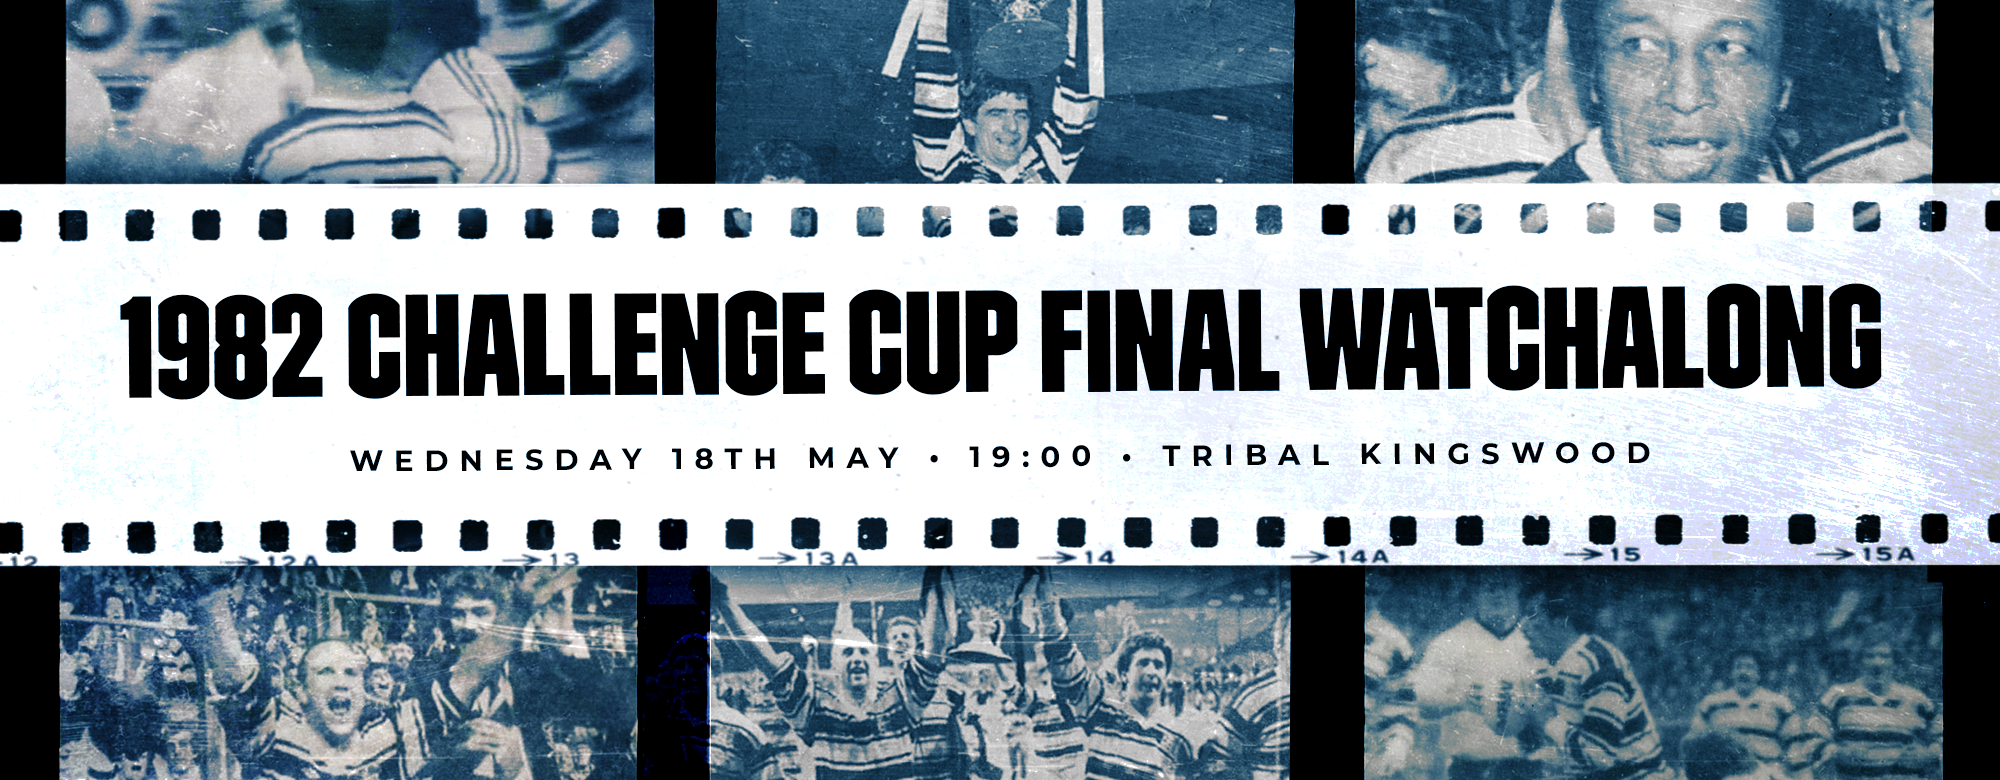 Hull&Proud Week: Celebrate 40th Anniversary Of Cup Victory With Watchalong Event